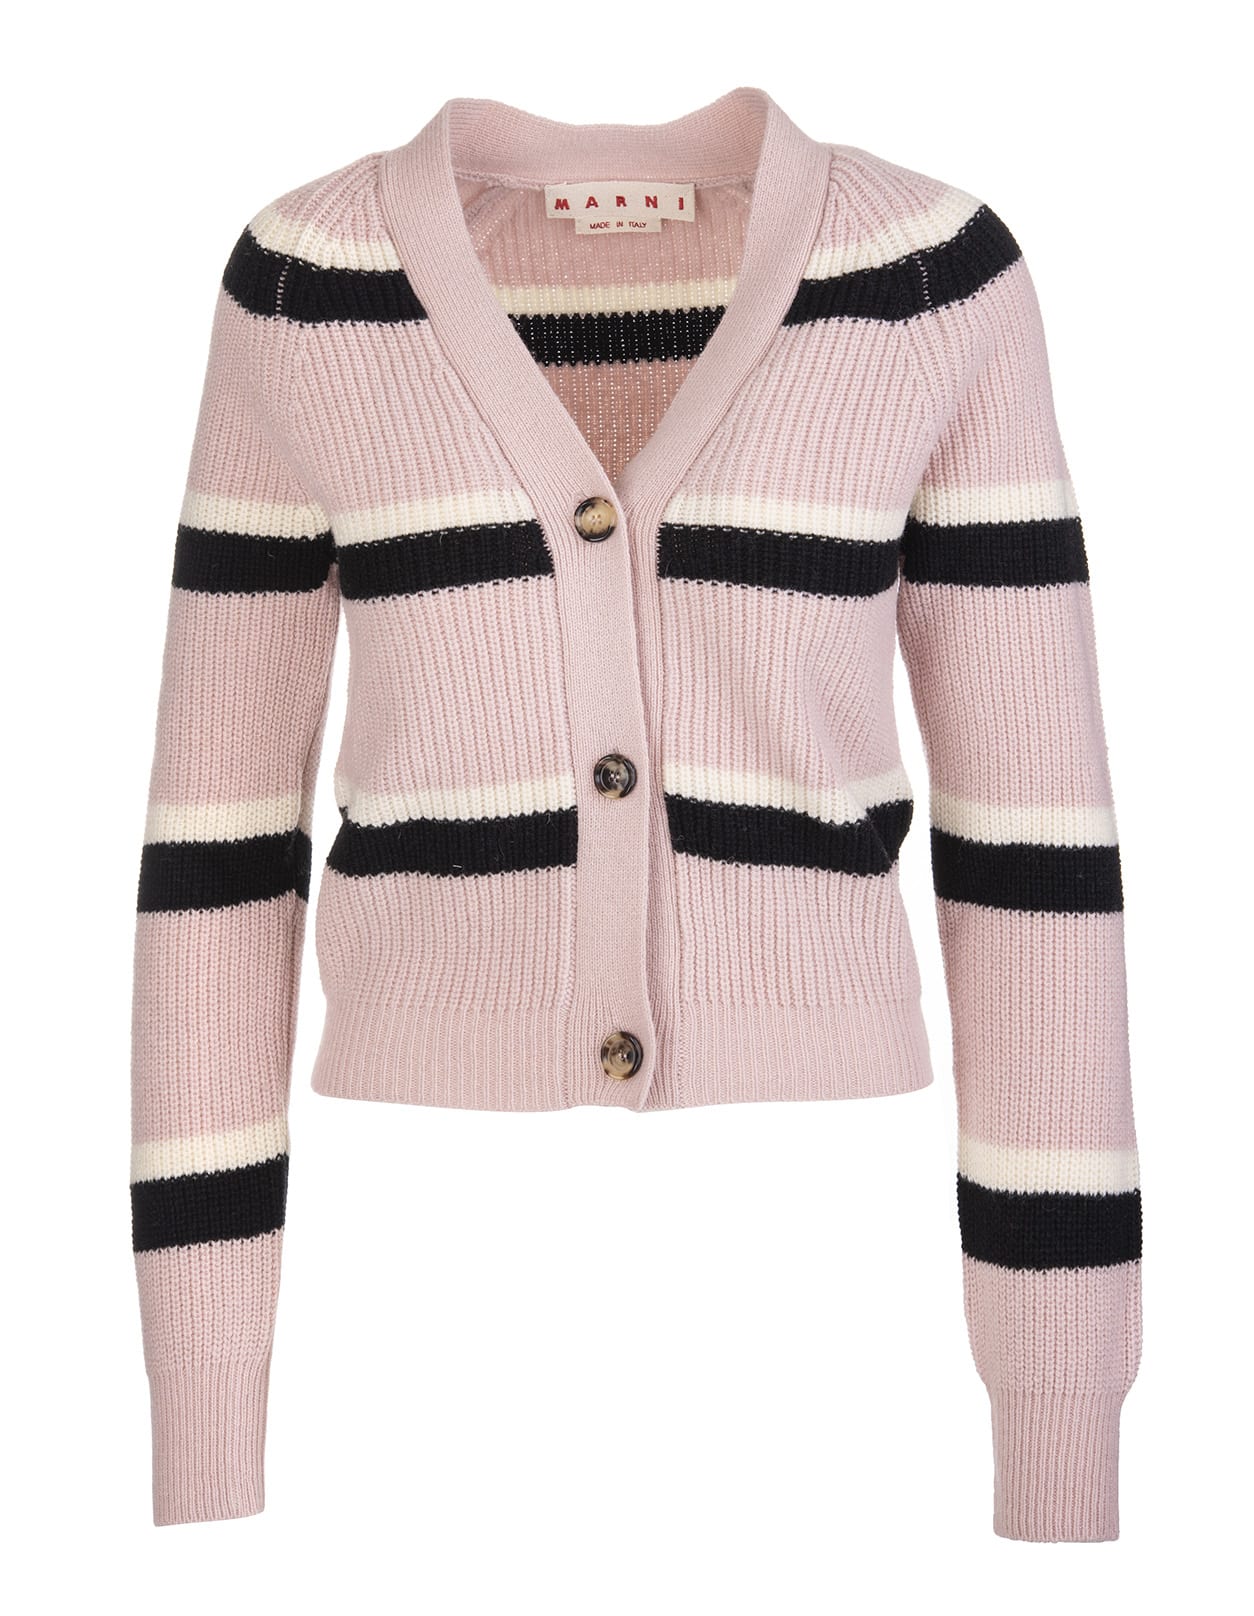 Marni Woman Pink Wool Cardigan With White And Black Stripes